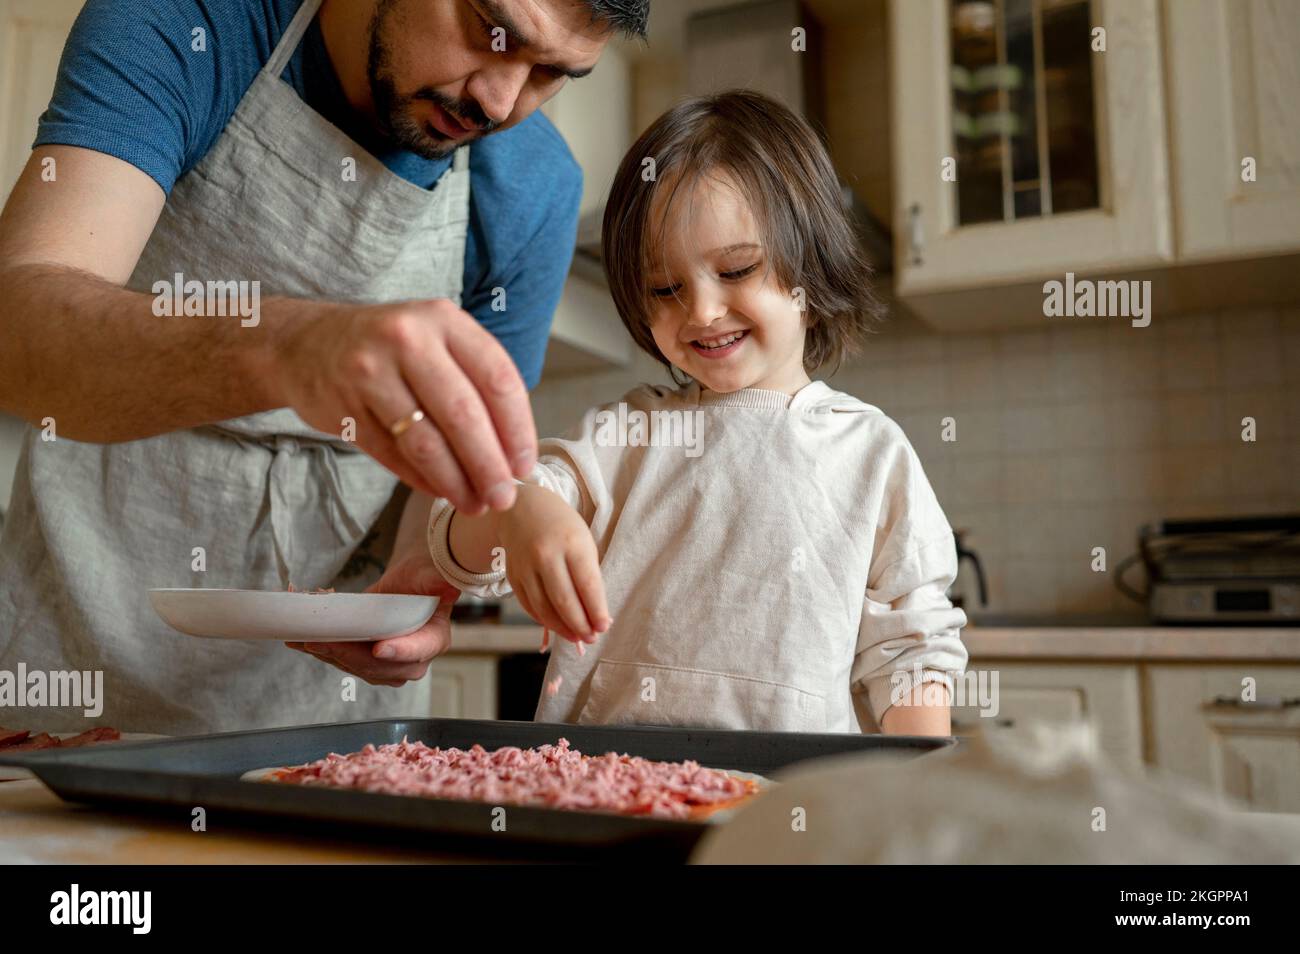 Father with son making pizza in kitchen at home Stock Photo